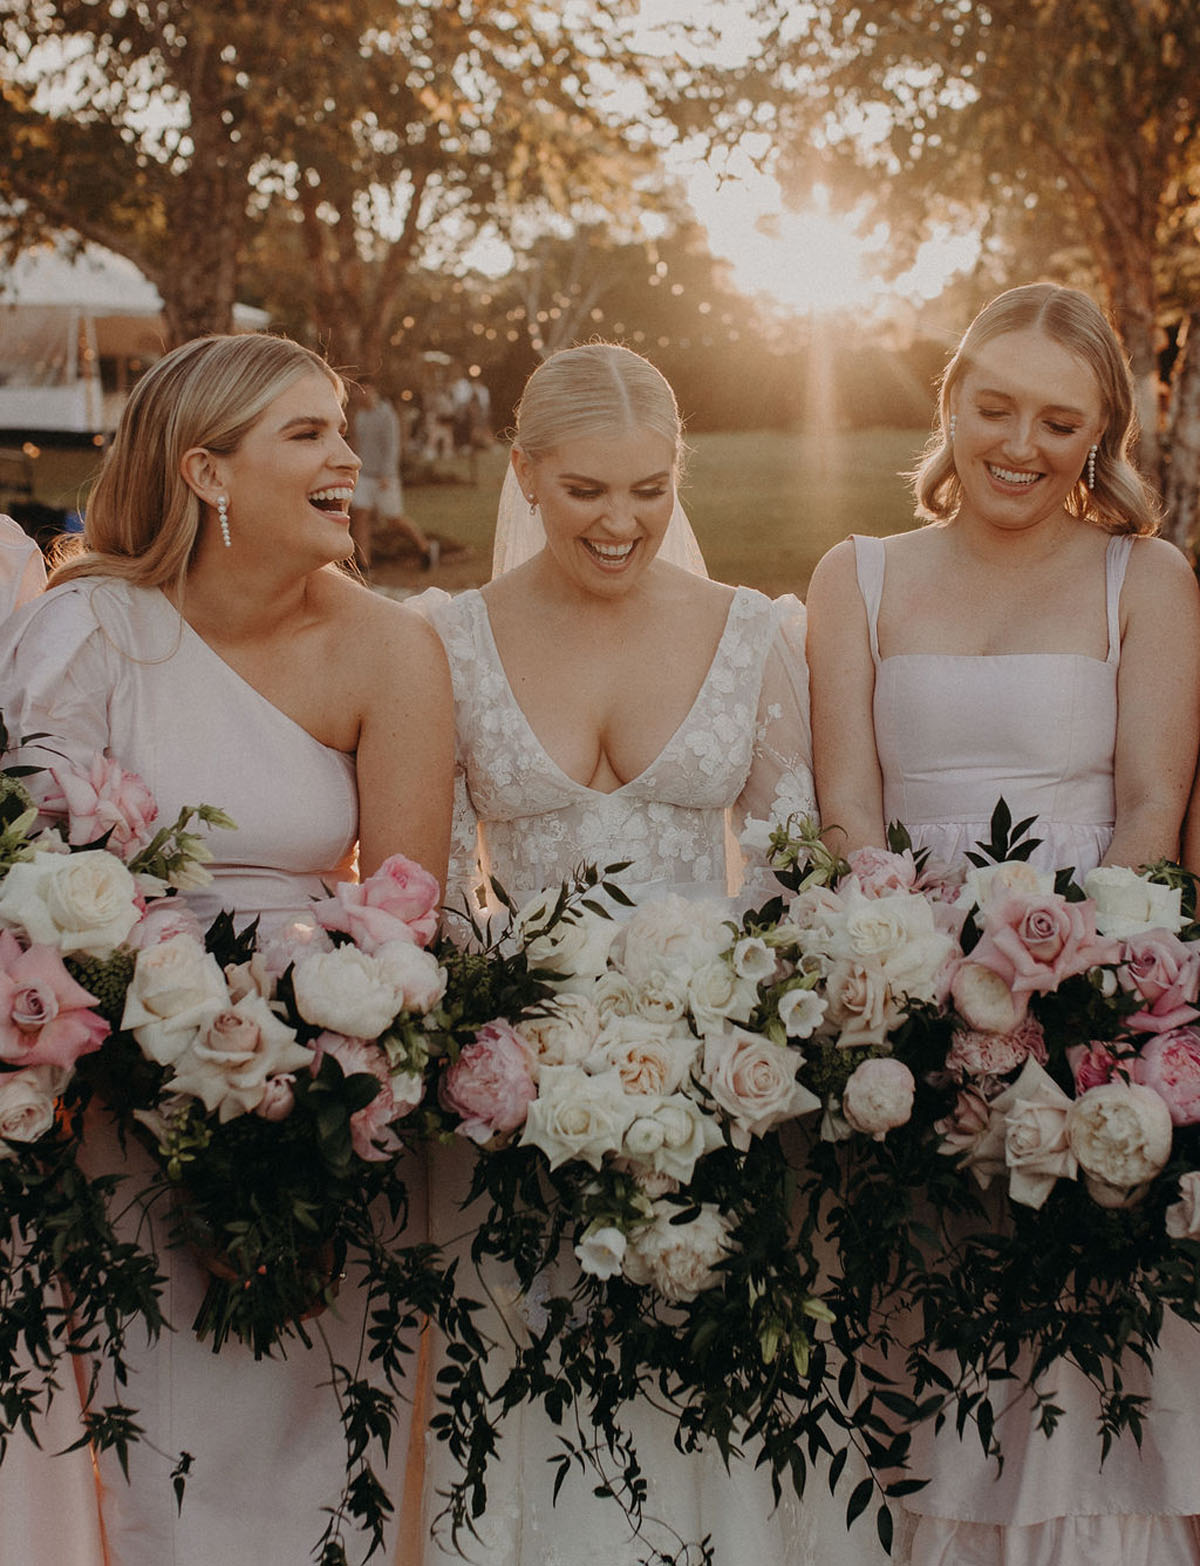 blush bridesmaid dresses and bridal party bouquets